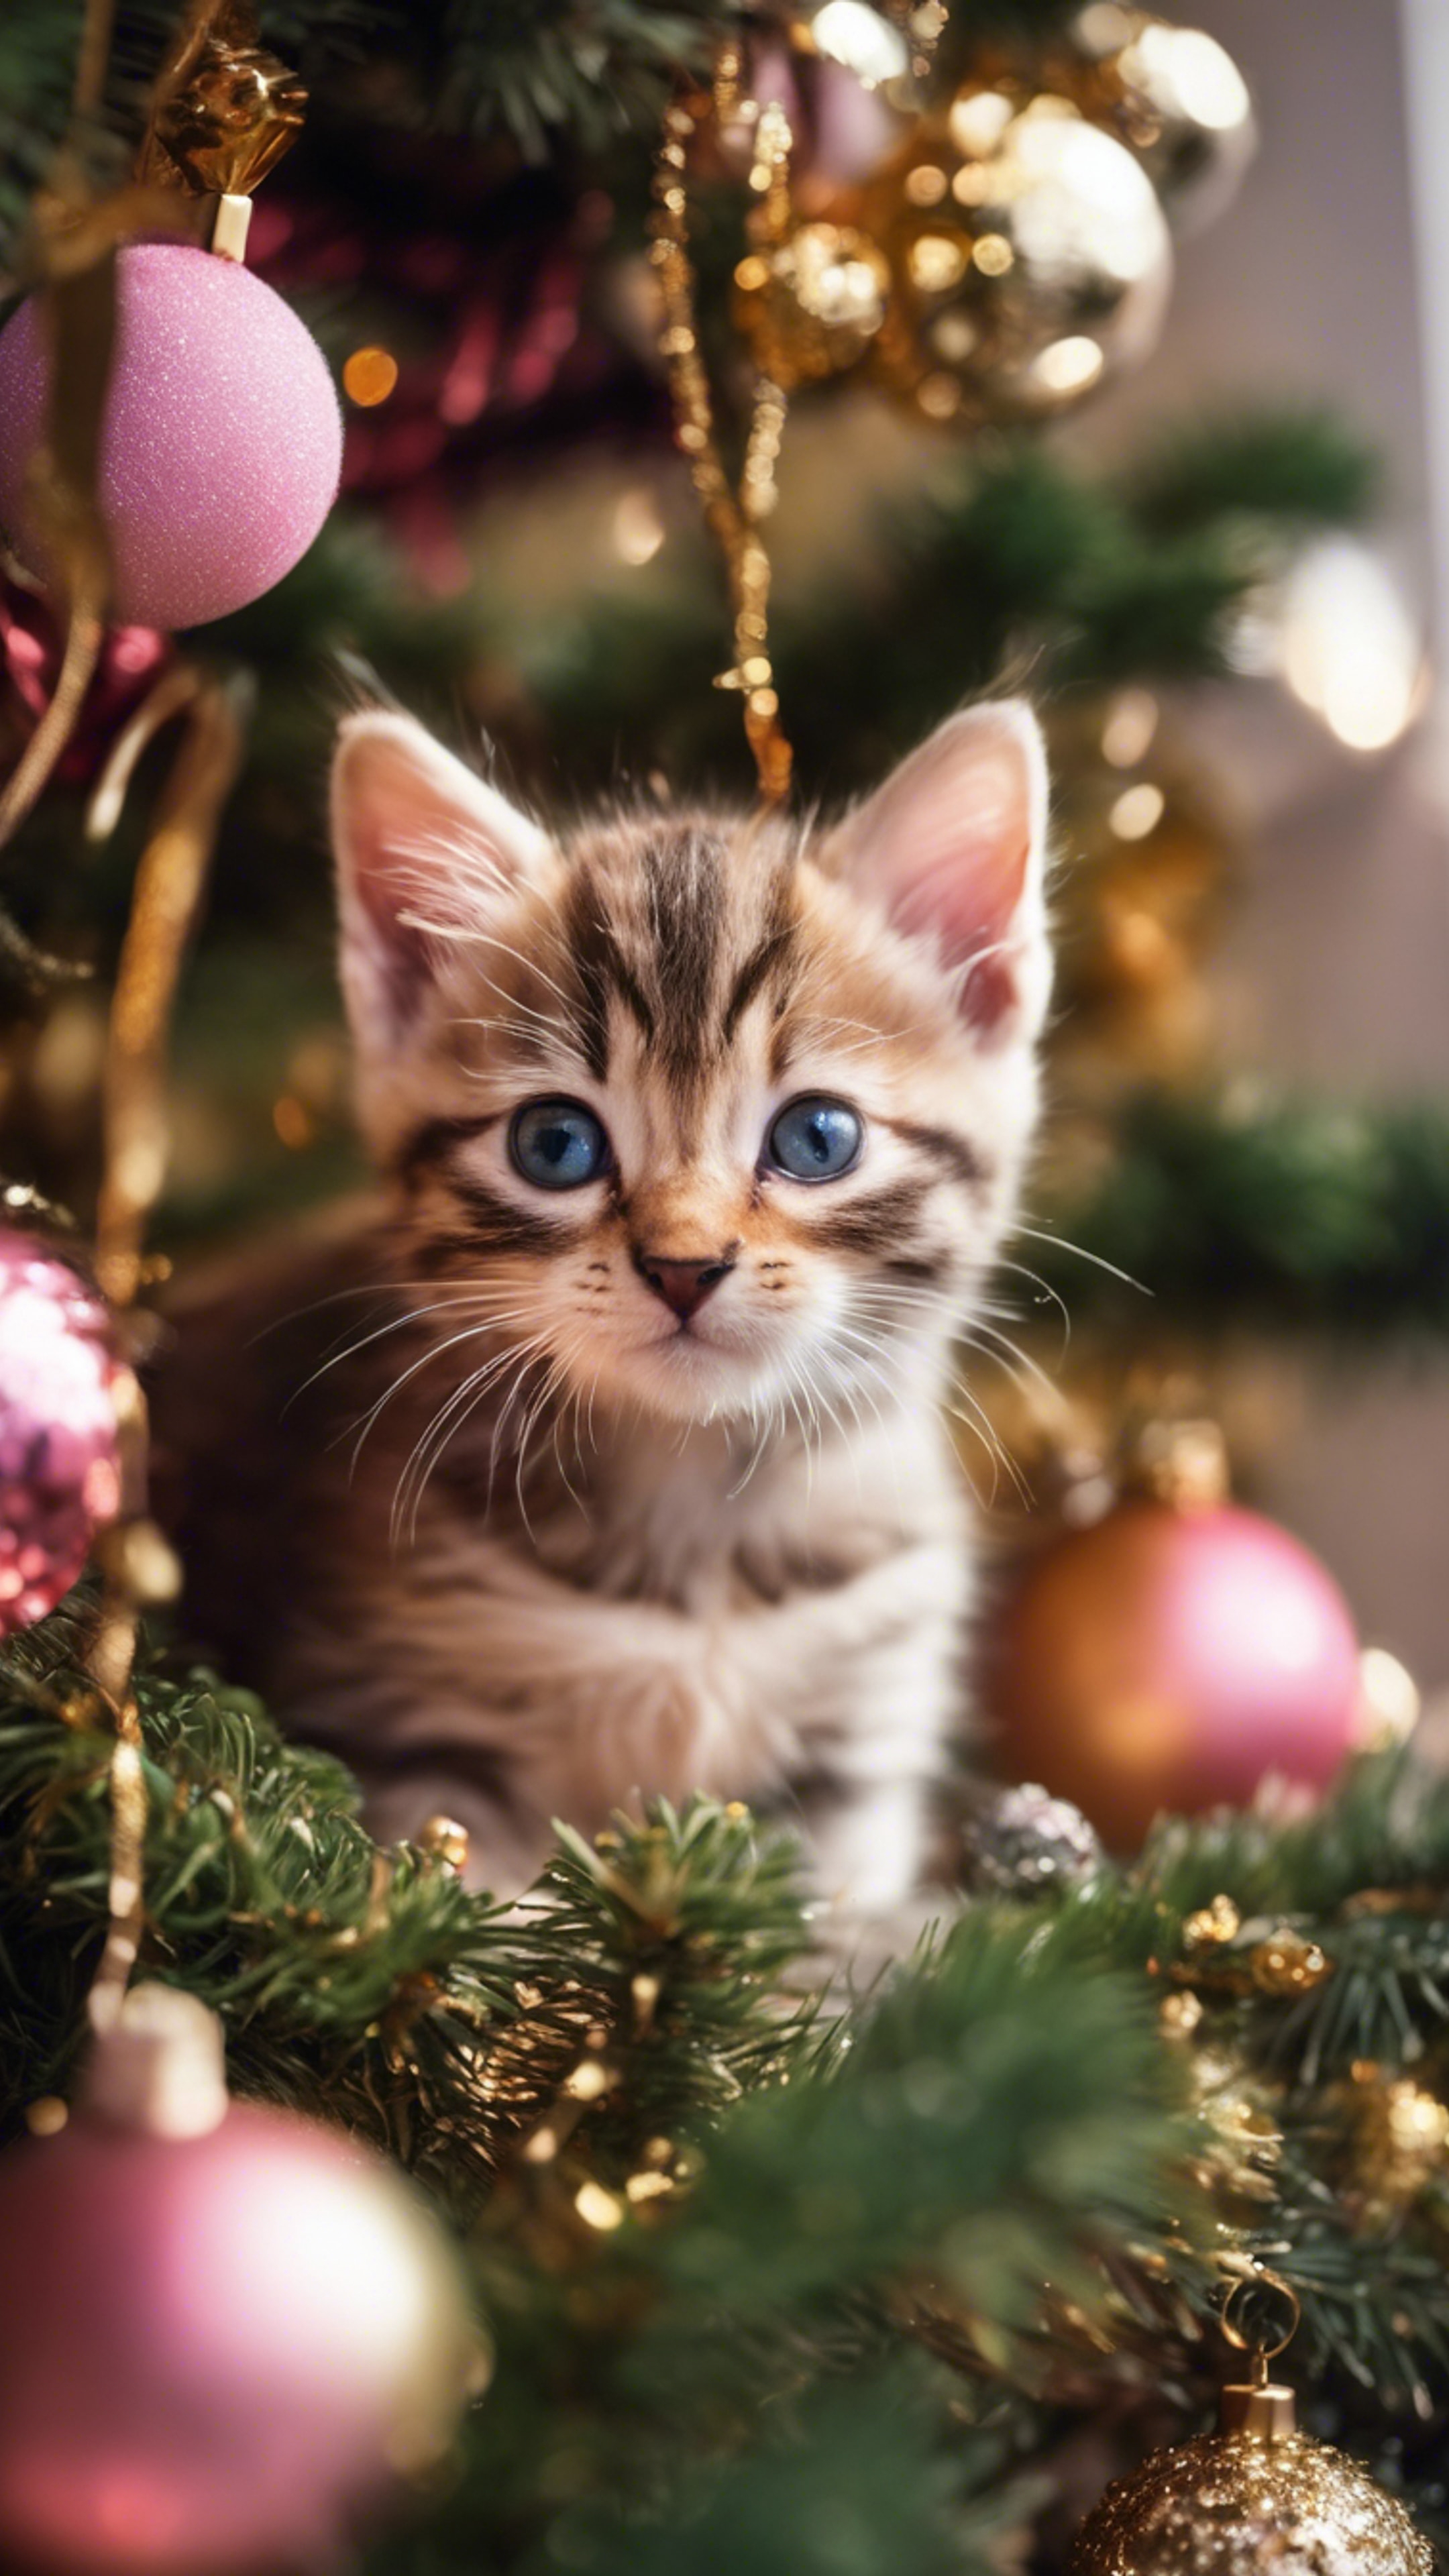 A curious kitten with pink fur investigating shiny gold ornaments on a Christmas tree. Wallpaper[73a86c1a032148fe866e]